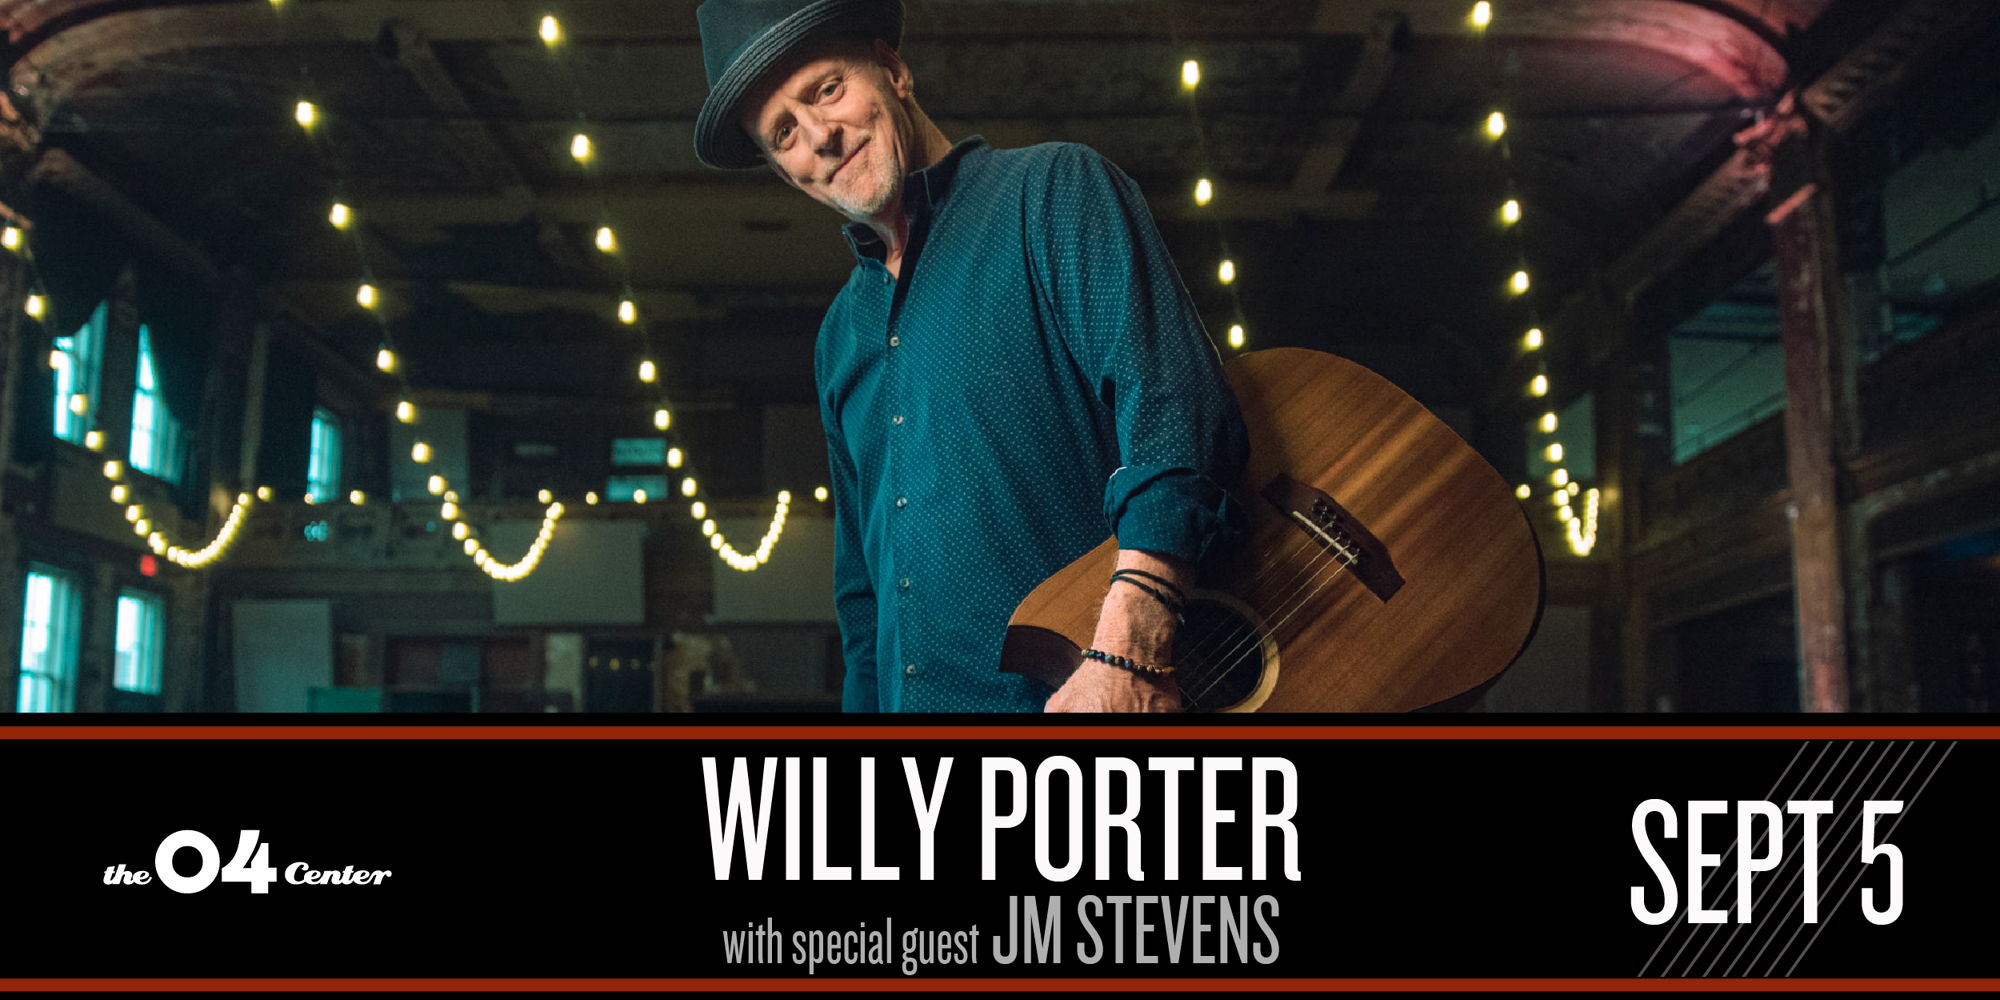 Willy Porter with special guest JM Stevens promotional image